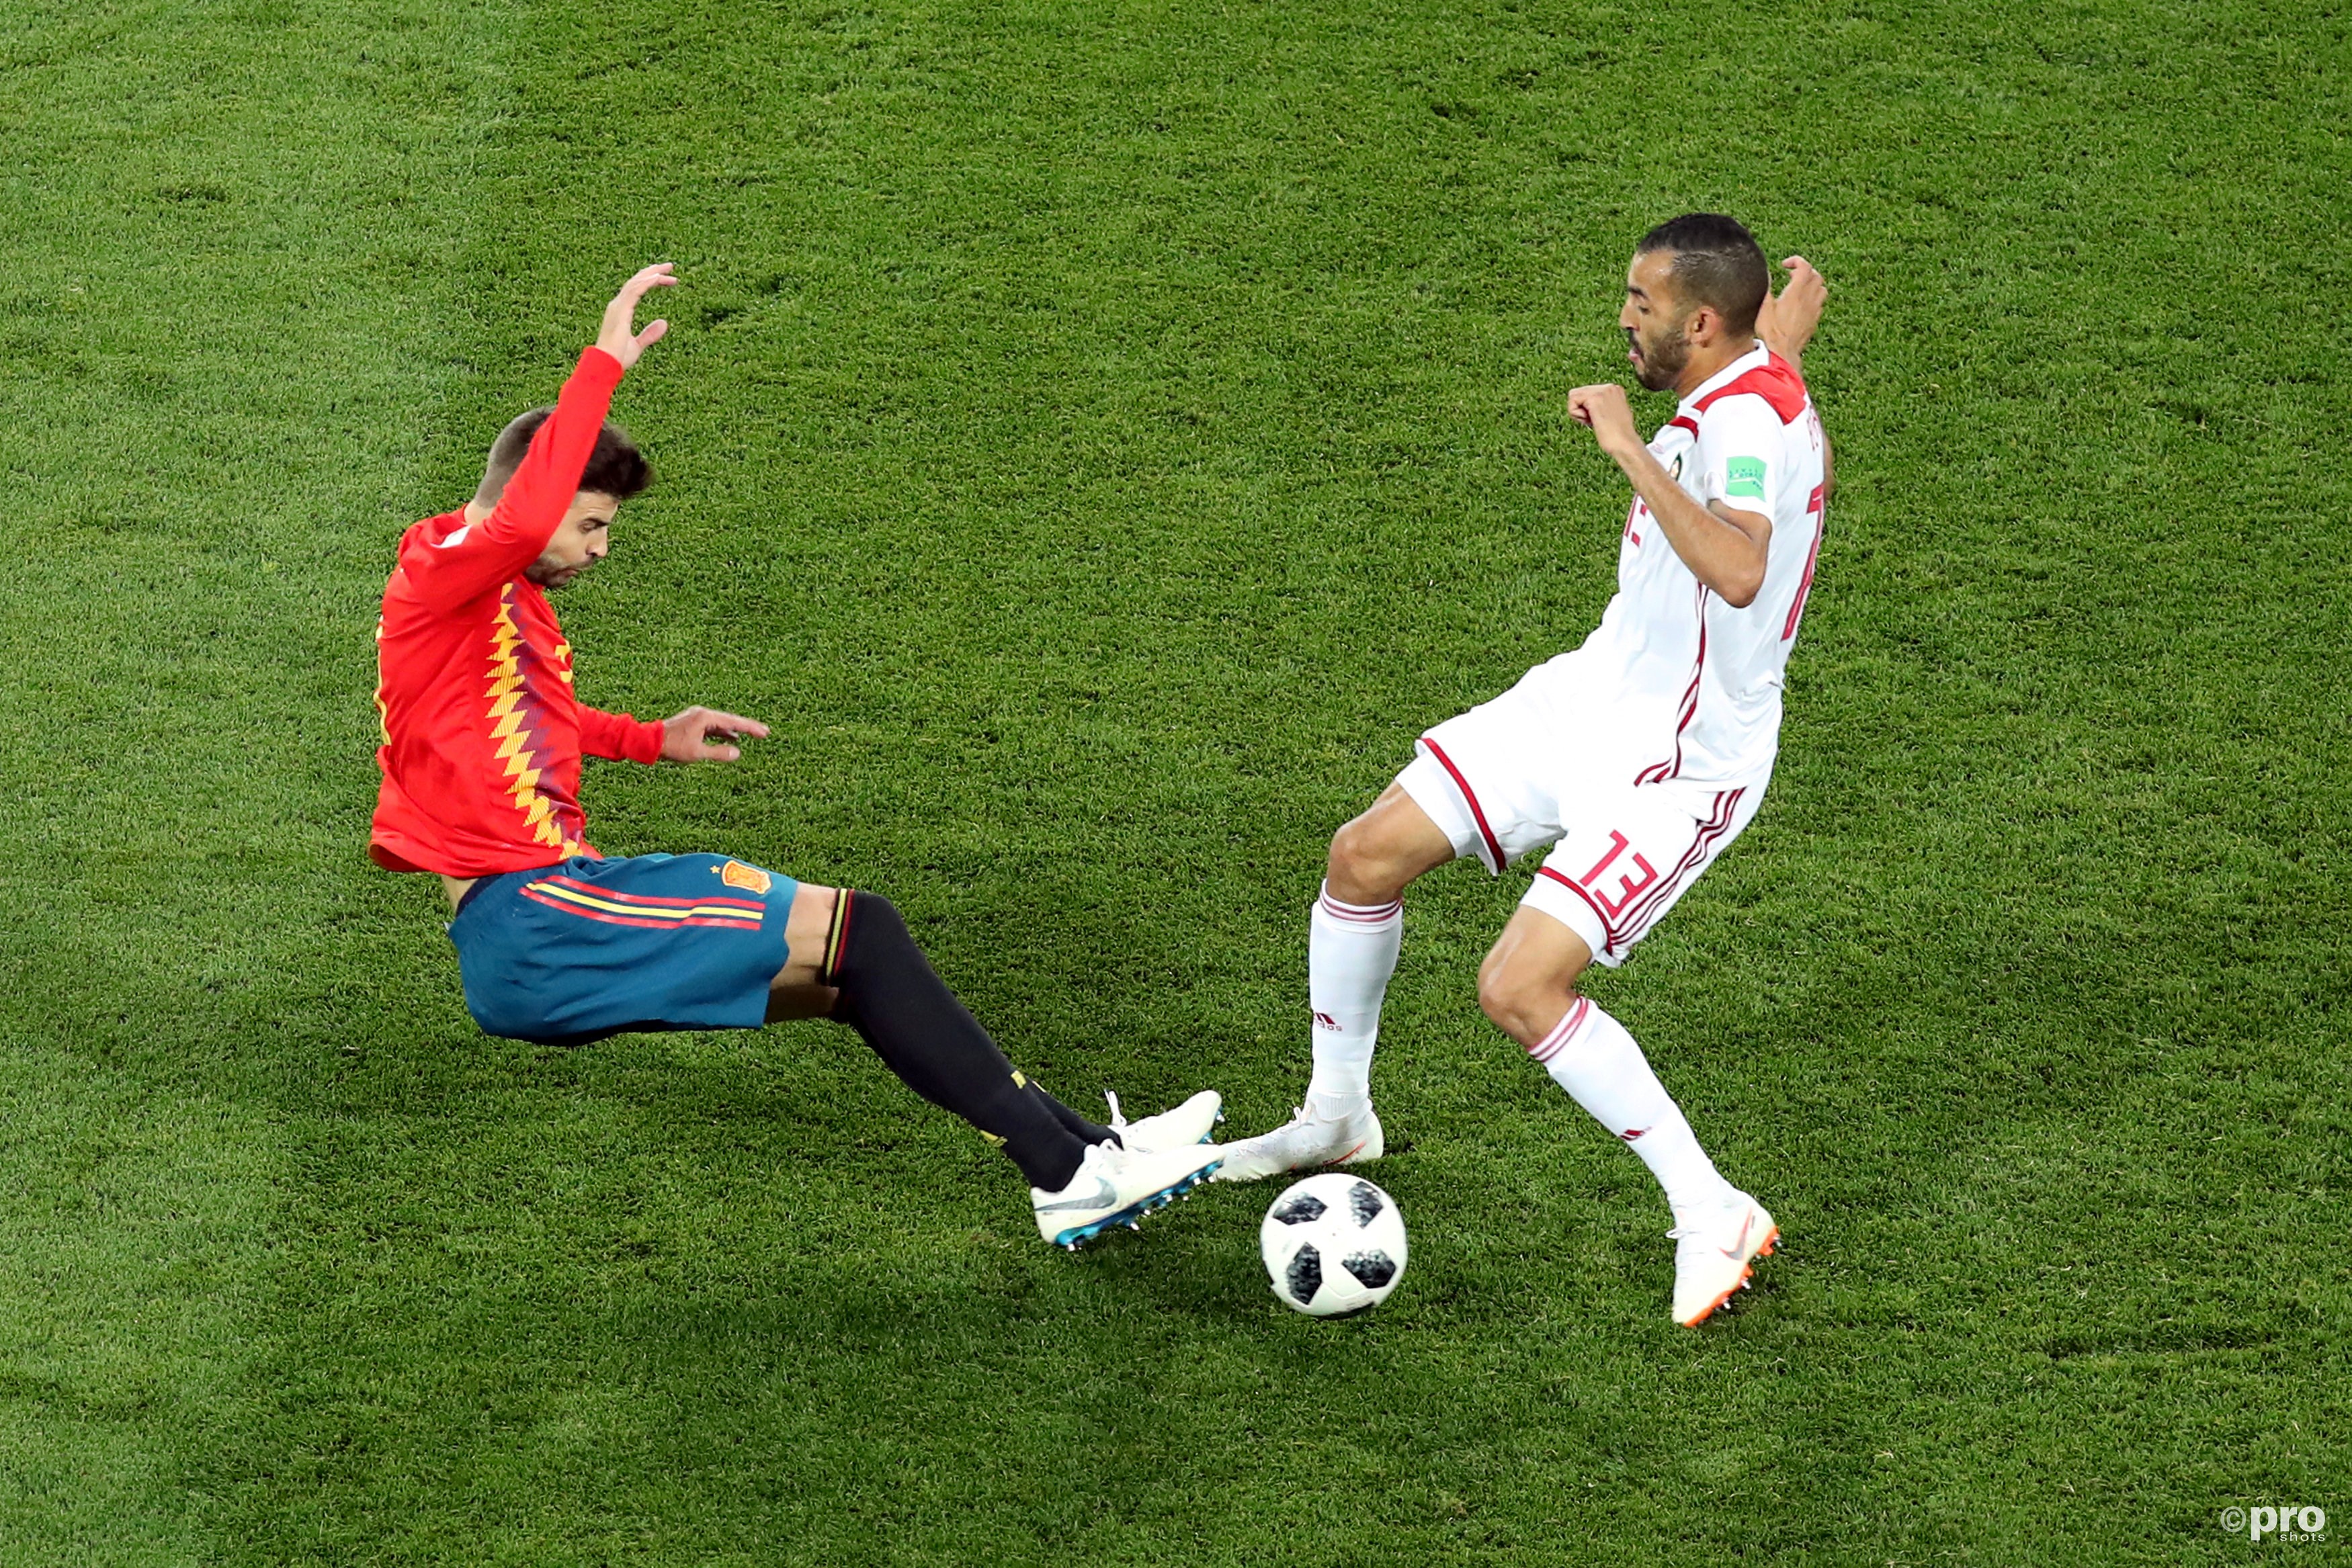 Gerard Pique in action with Morocco's Khalid Boutaib. (PRO SHOTS/Action Images)